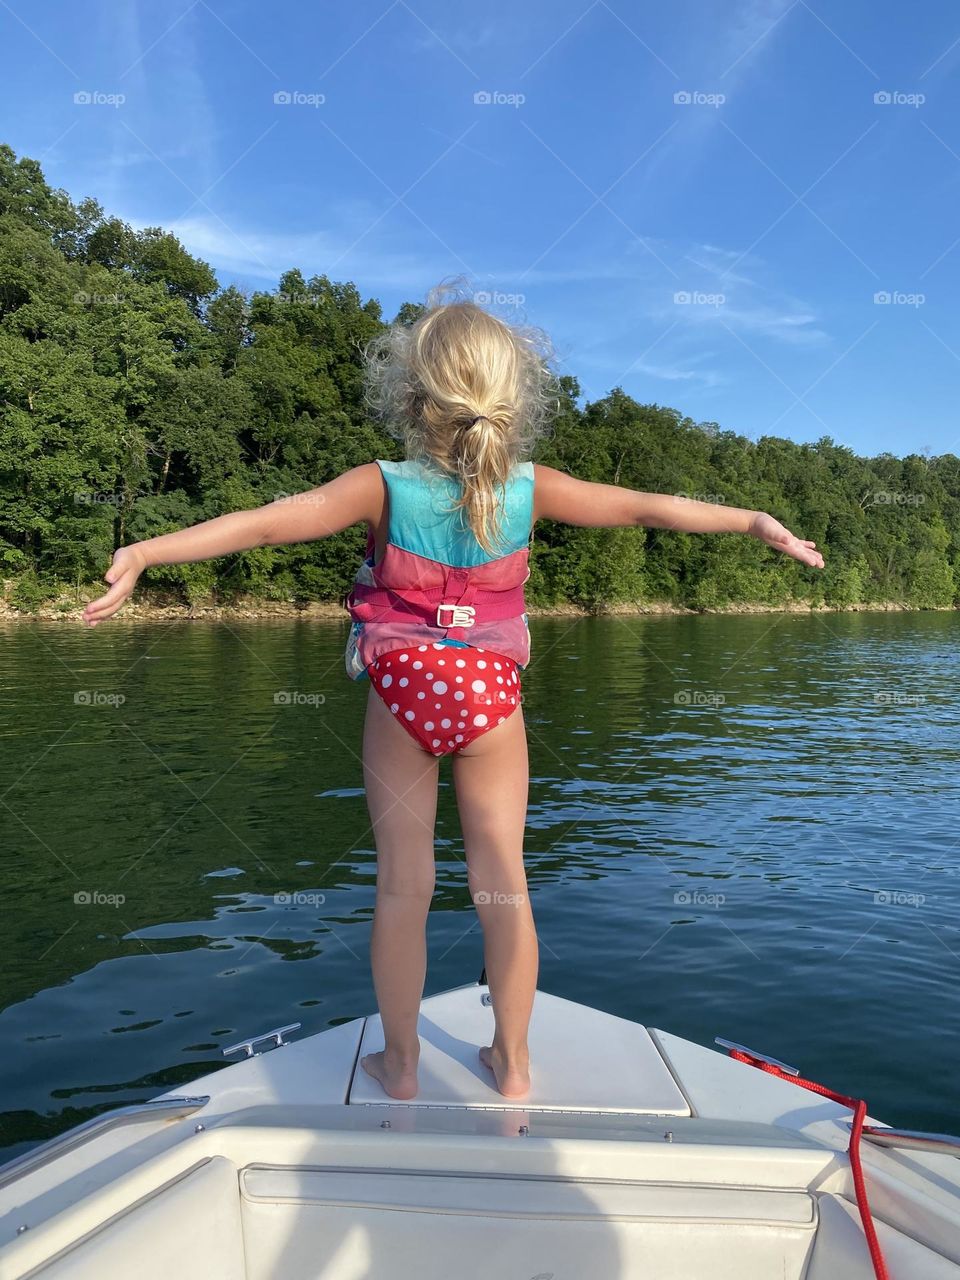 Living her best life on a hot summer day out on the lake in Kentucky 